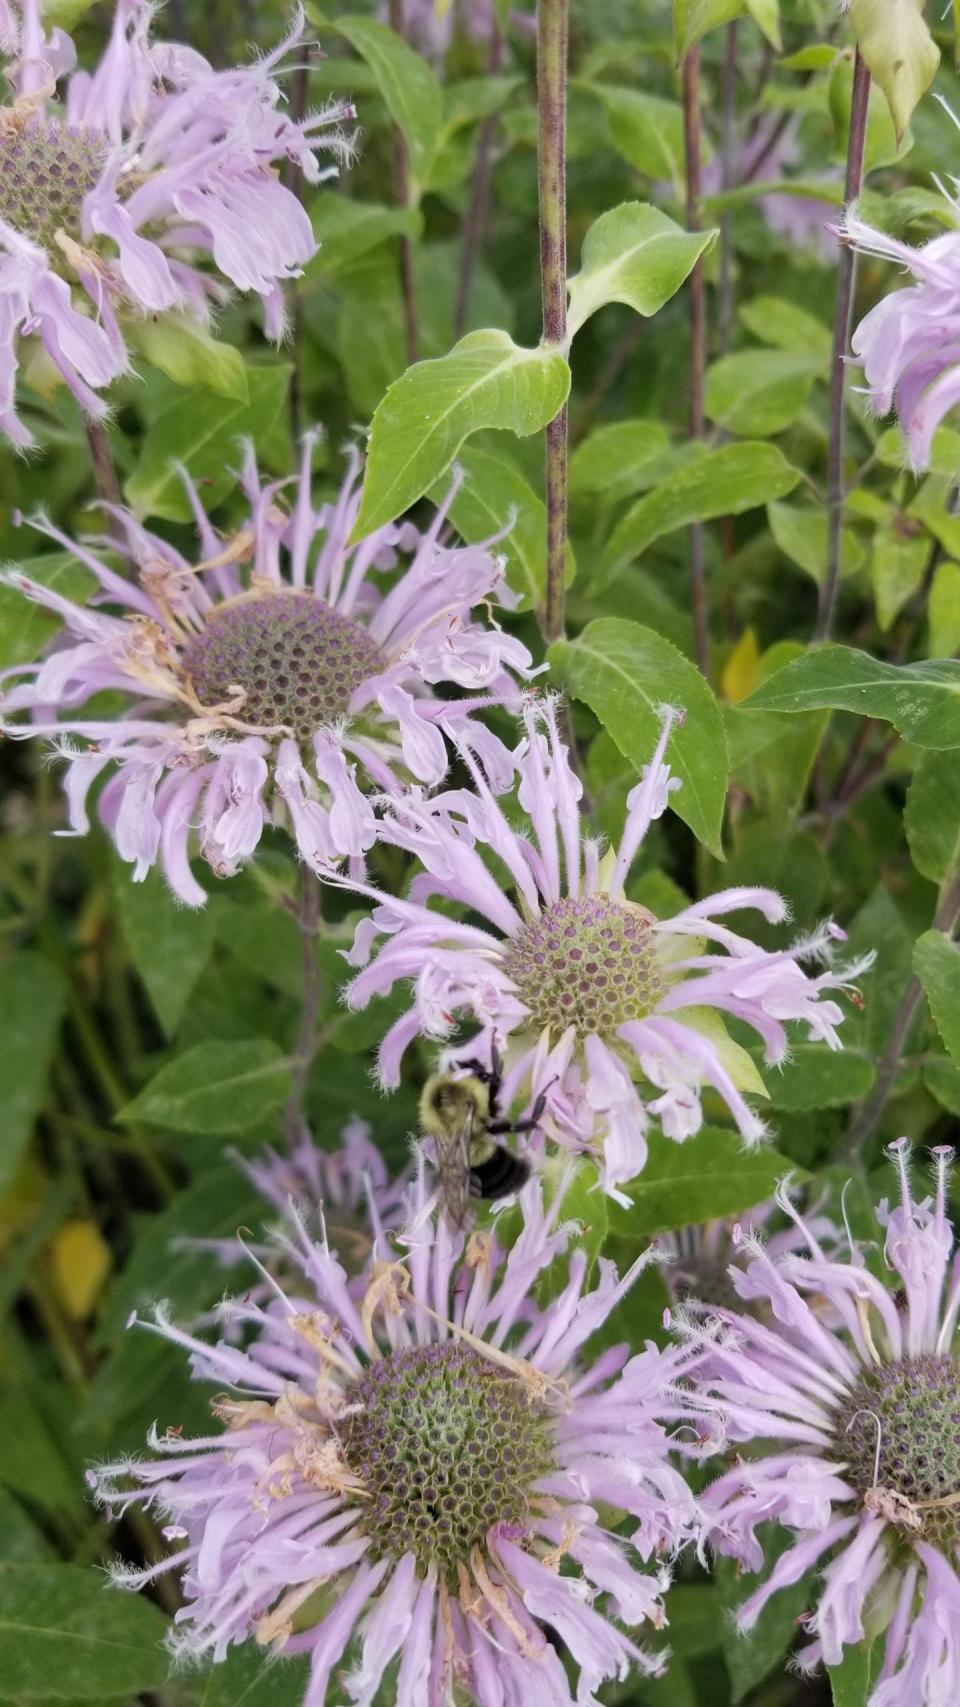 The wild bergamot species of beebalm grows up to 6 feet tall and attracts many species of bees.